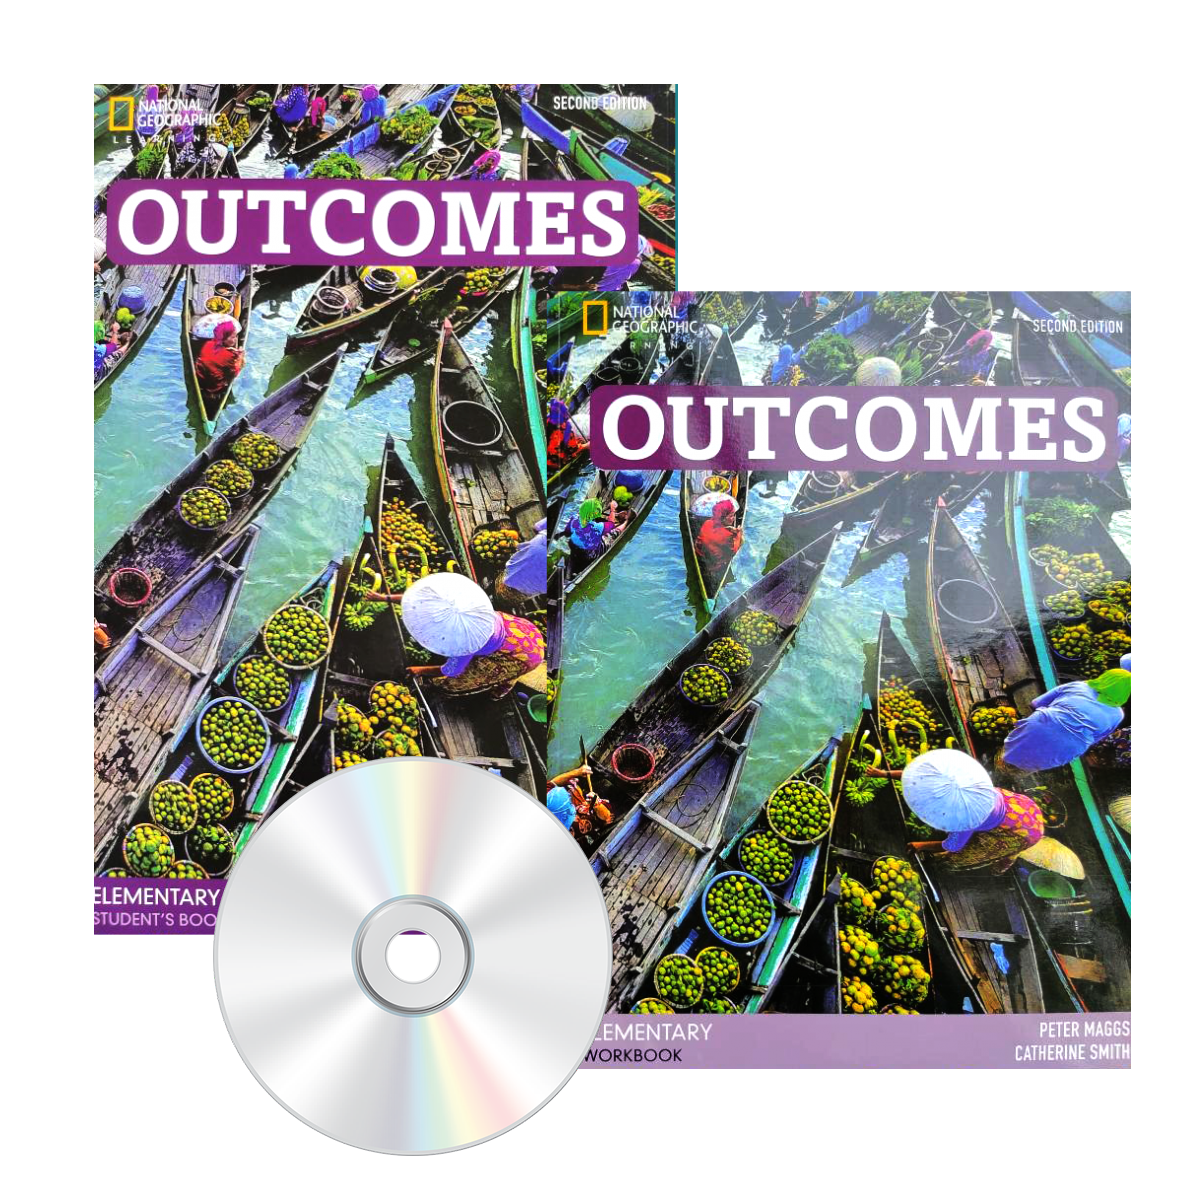 Outcomes elementary student. Outcomes Elementary. Outcomes Elementary student's book. Outcomes Elementary 1st Edition. Outcomes Elementary student's book ответы.